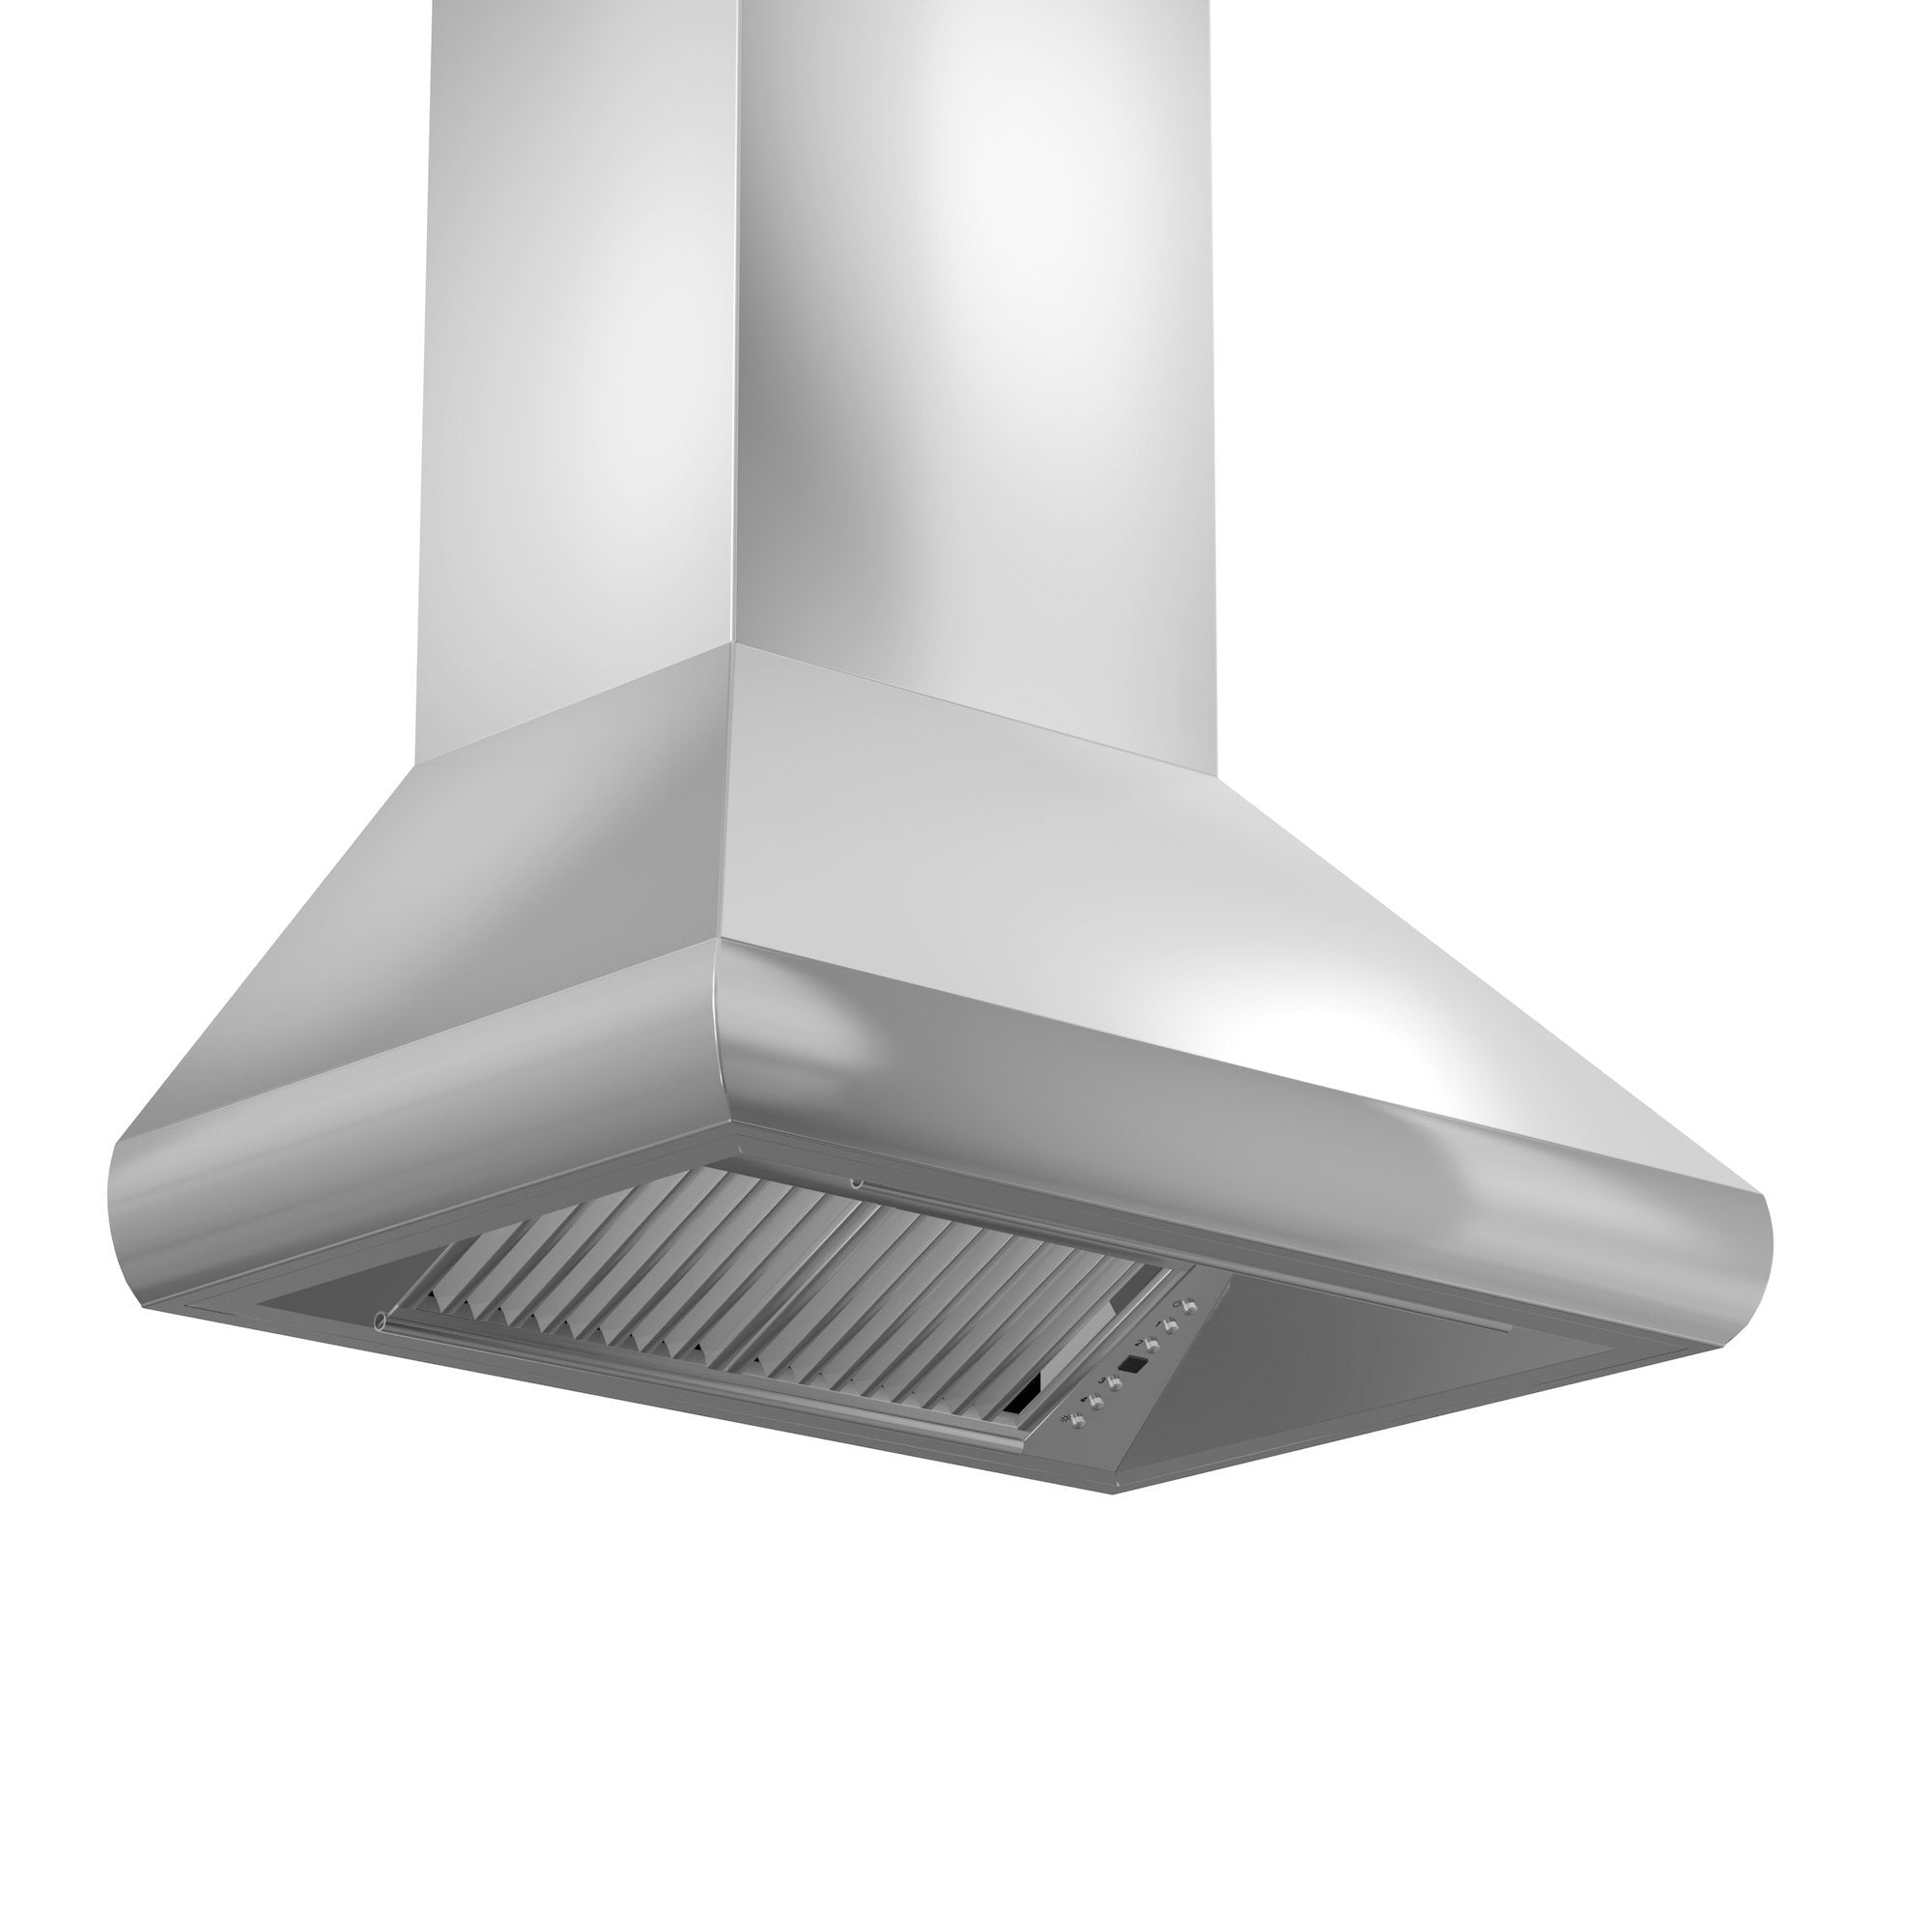 ZLINE Professional Convertible Vent Wall Mount Range Hood in Stainless Steel (587) - New Star Living